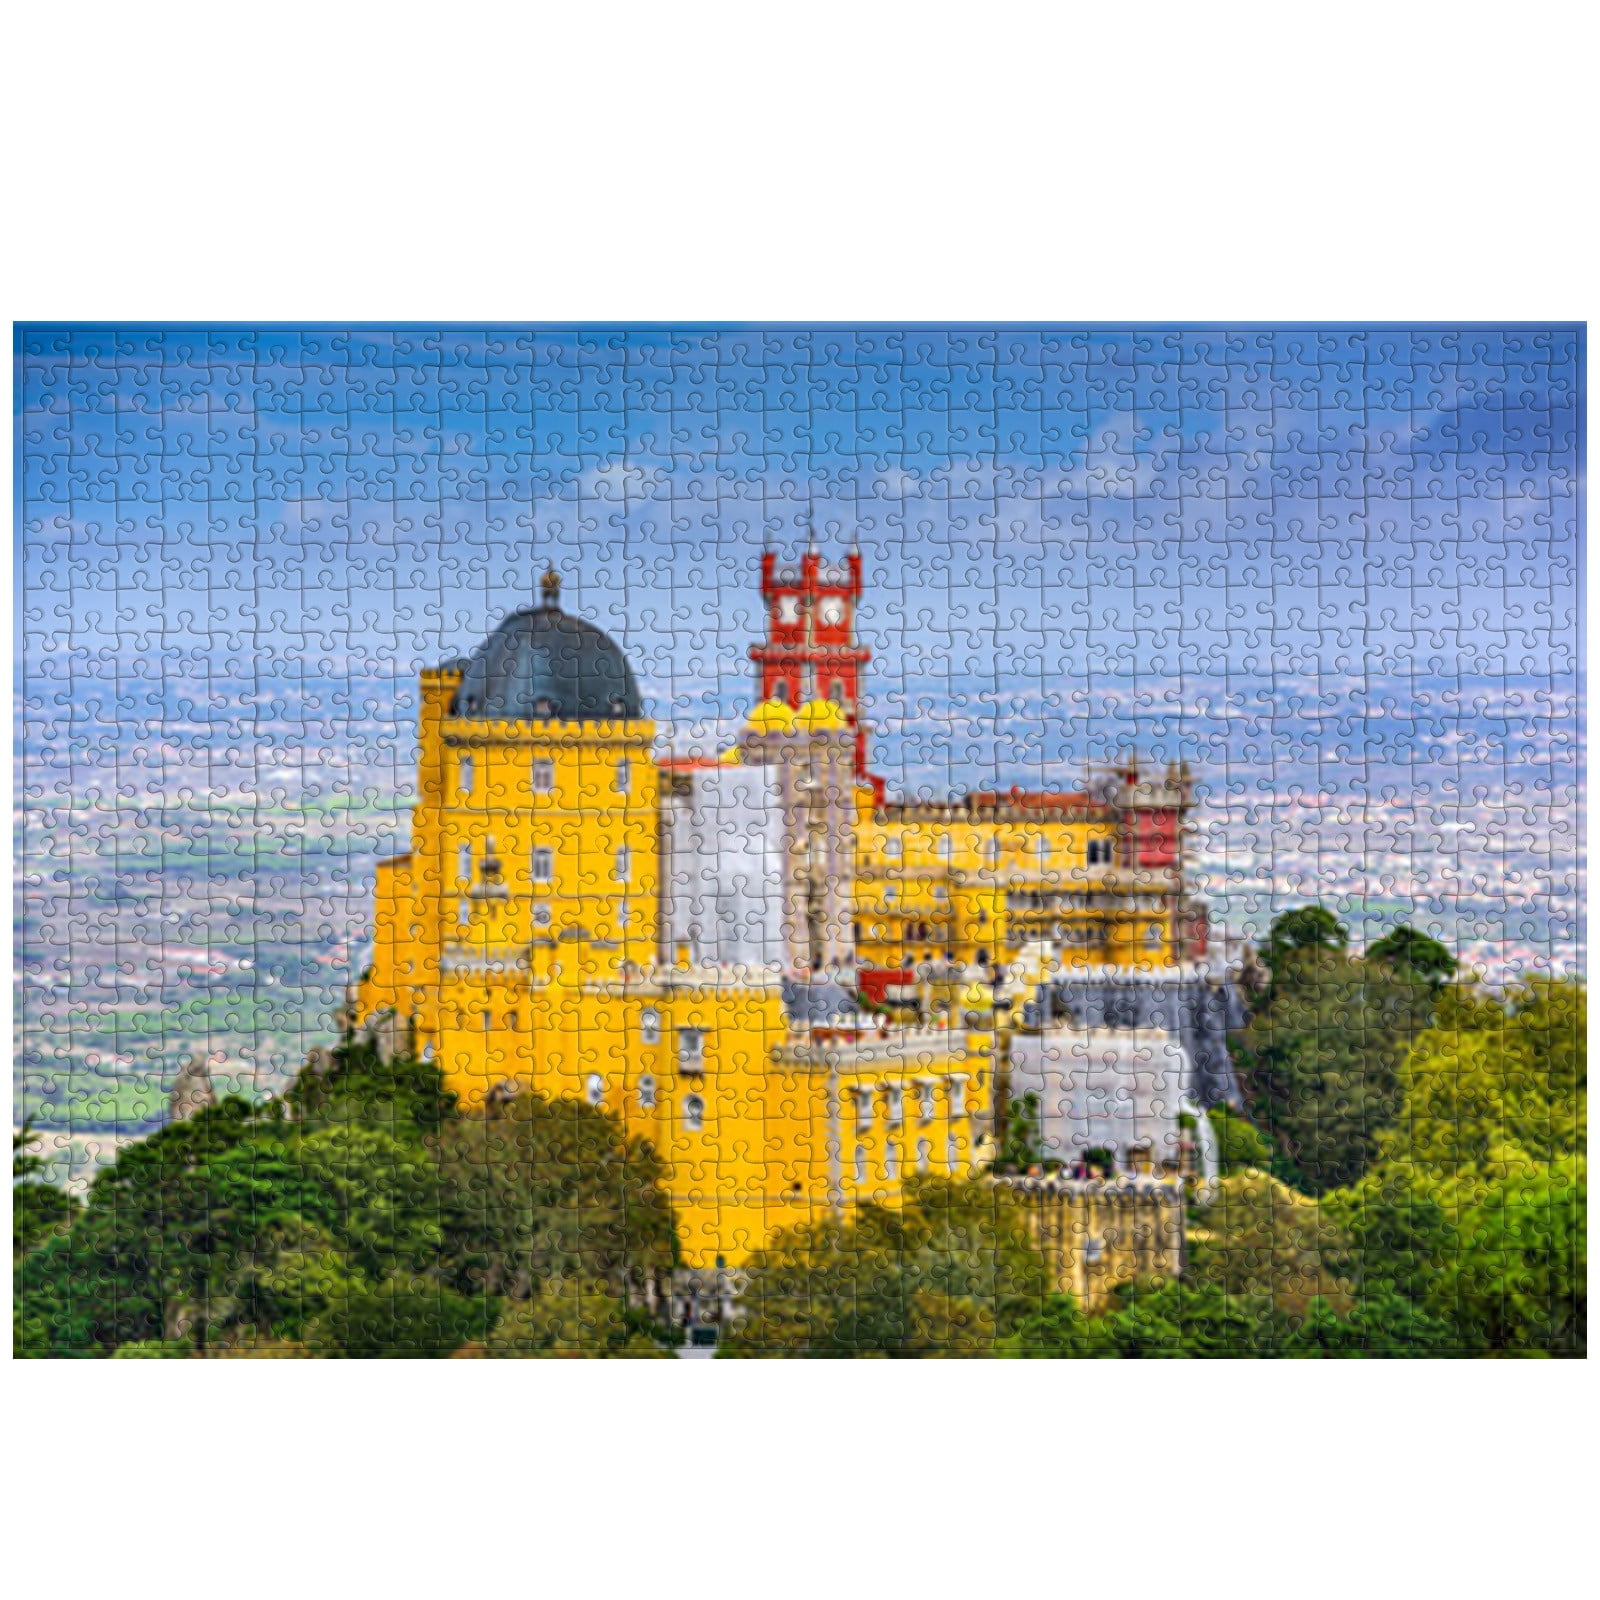 Adult Jigsaw Puzzle 5000 Piece Crazy Travel Adult Wooden Jigsaw Puzzle Game Teenager Puzzle Game Toy Gift 